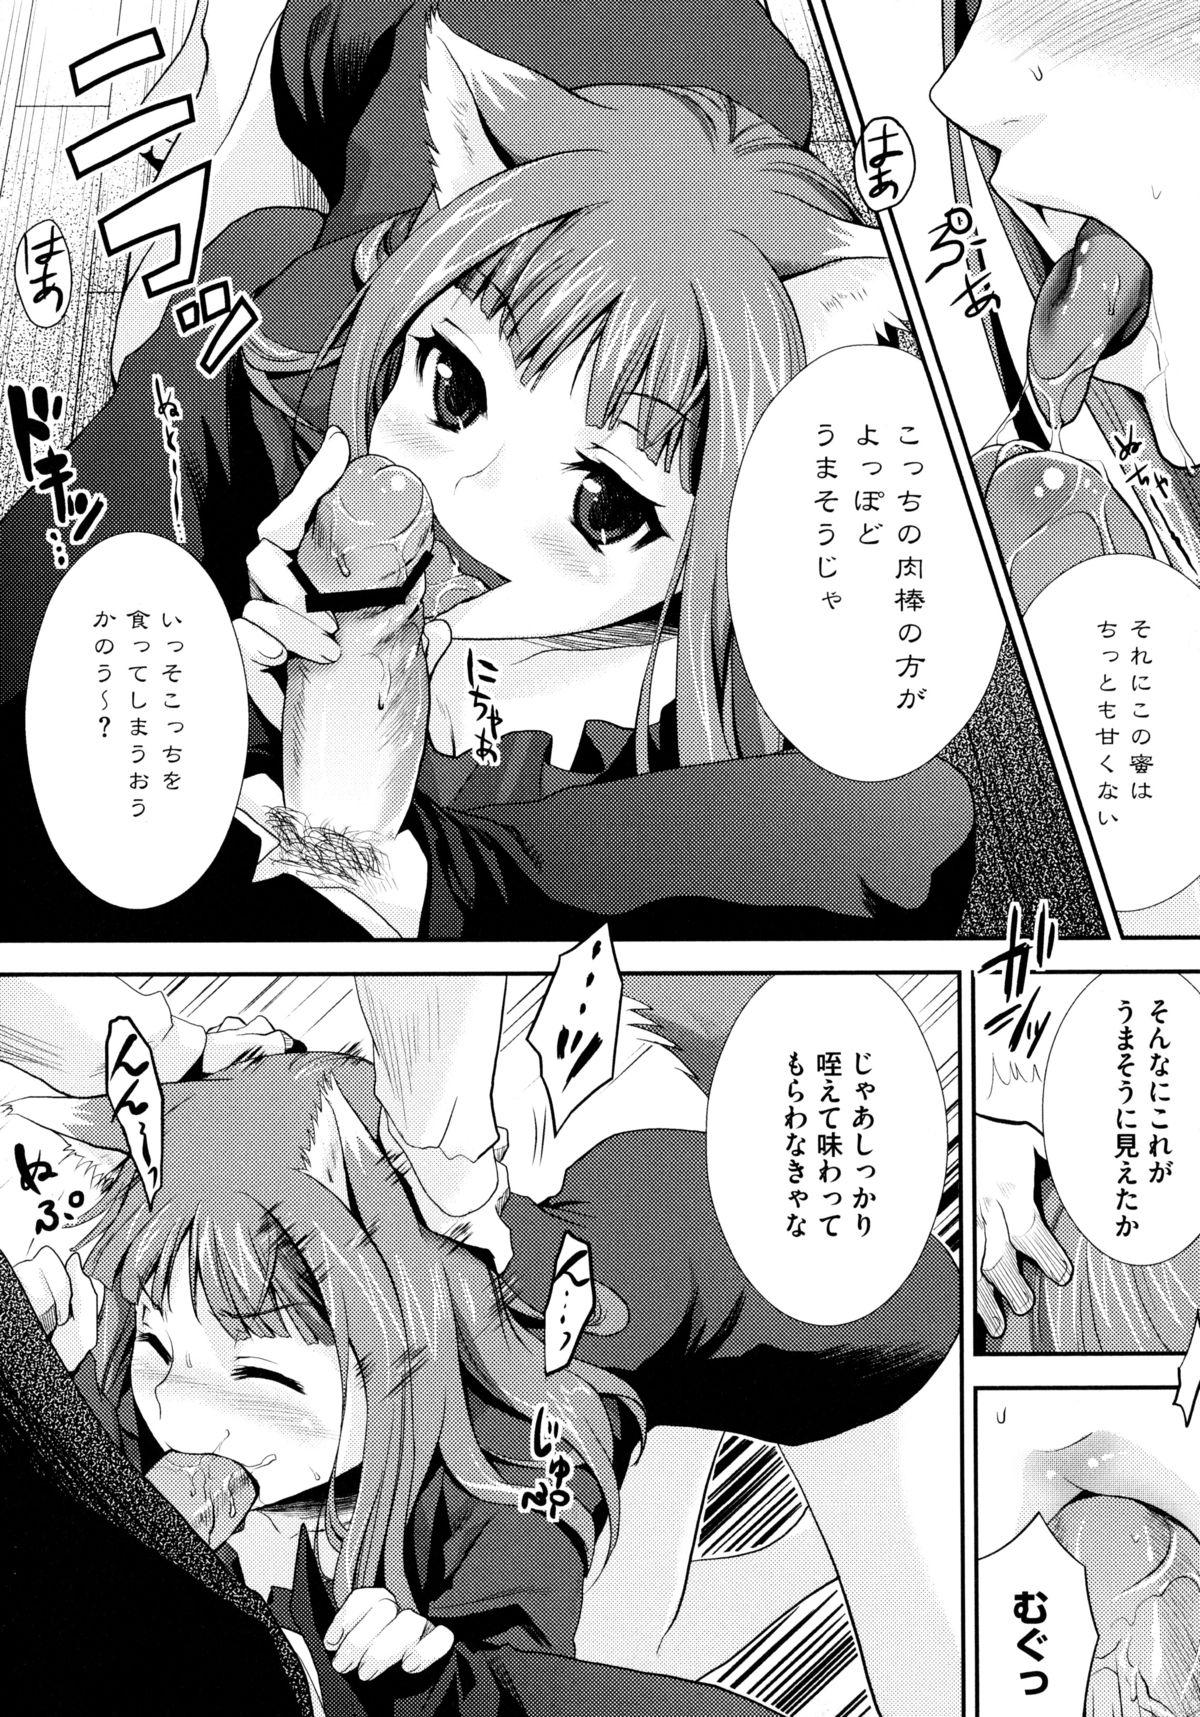 Latino Ookami Musume to Inkou no Tabi - Spice and wolf Pussylicking - Page 10